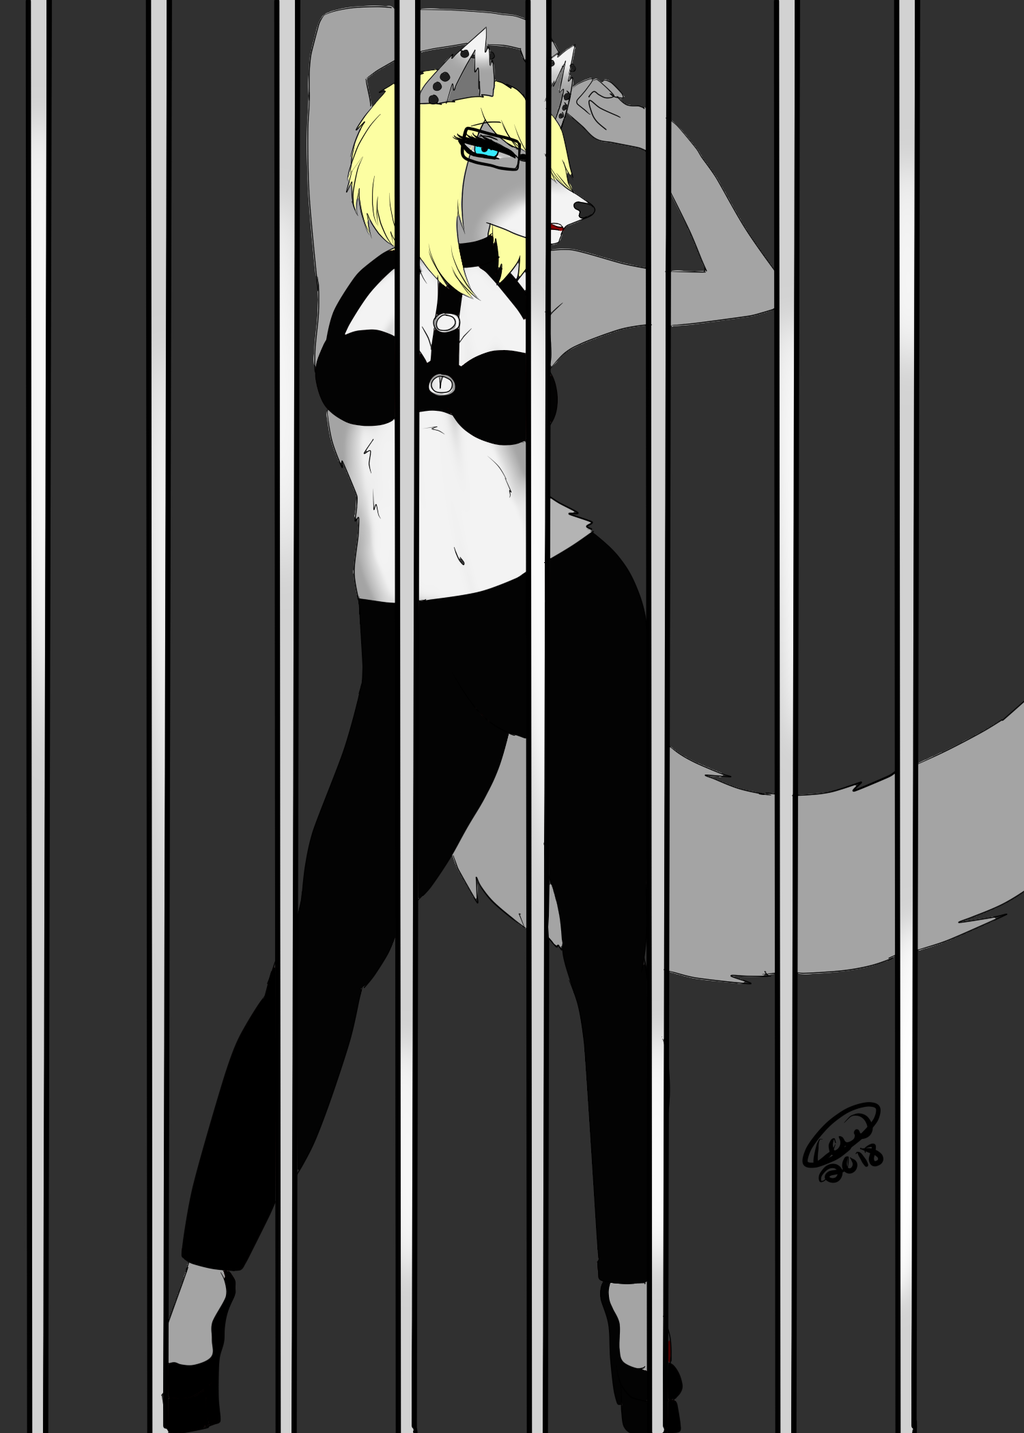 Most recent image: Caged Animal